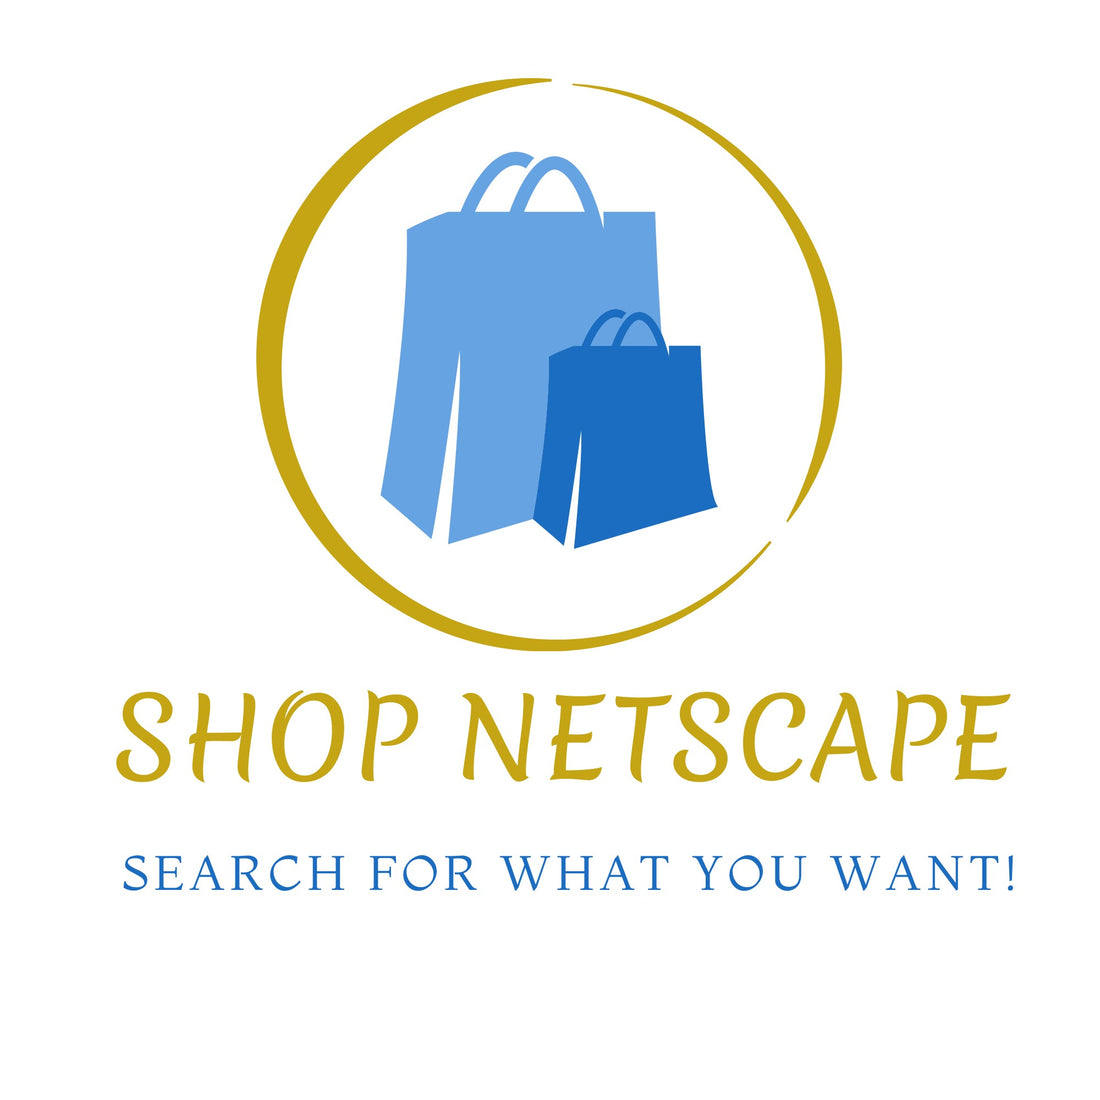 Top 5 Benefits Of Shopping Online With SHOP NETSCAPE.